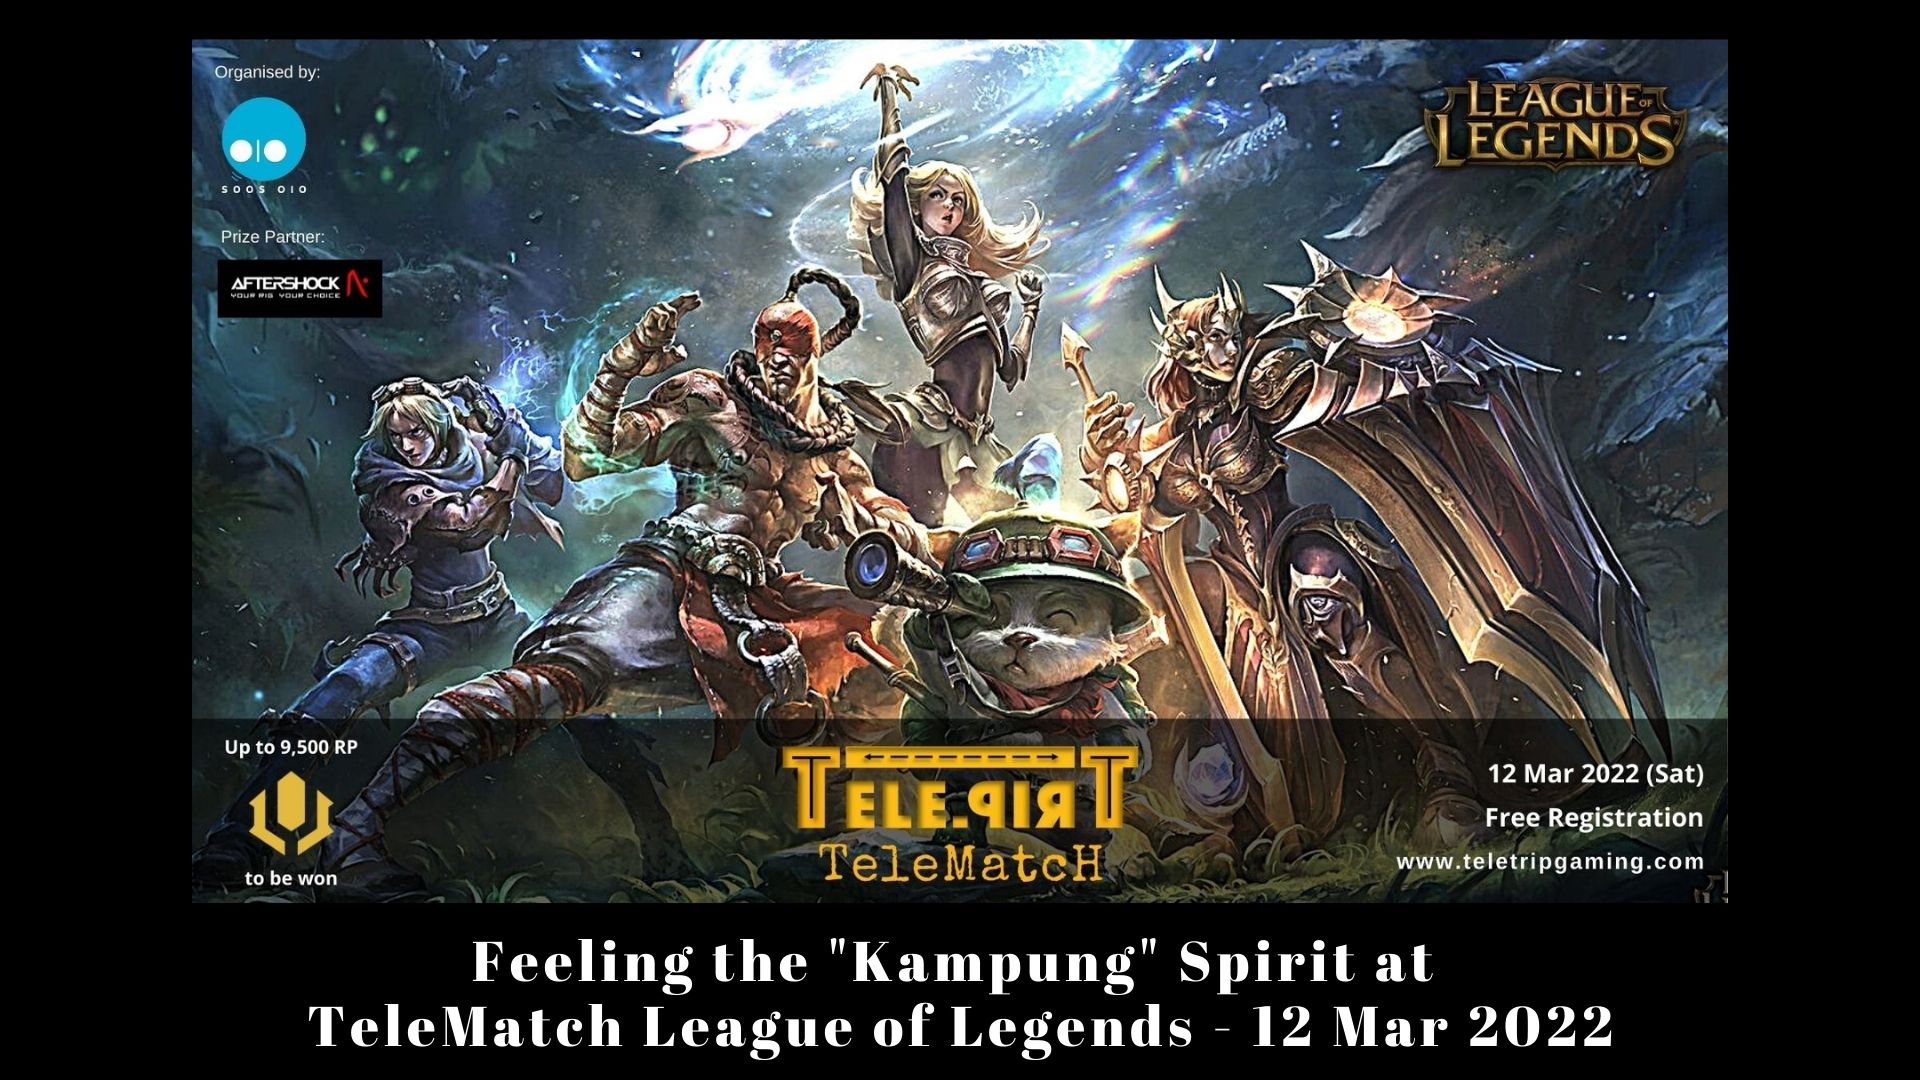 Feeling the "Kampung" Spirit at TeleMatch League of Legends - 12 Mar 2022